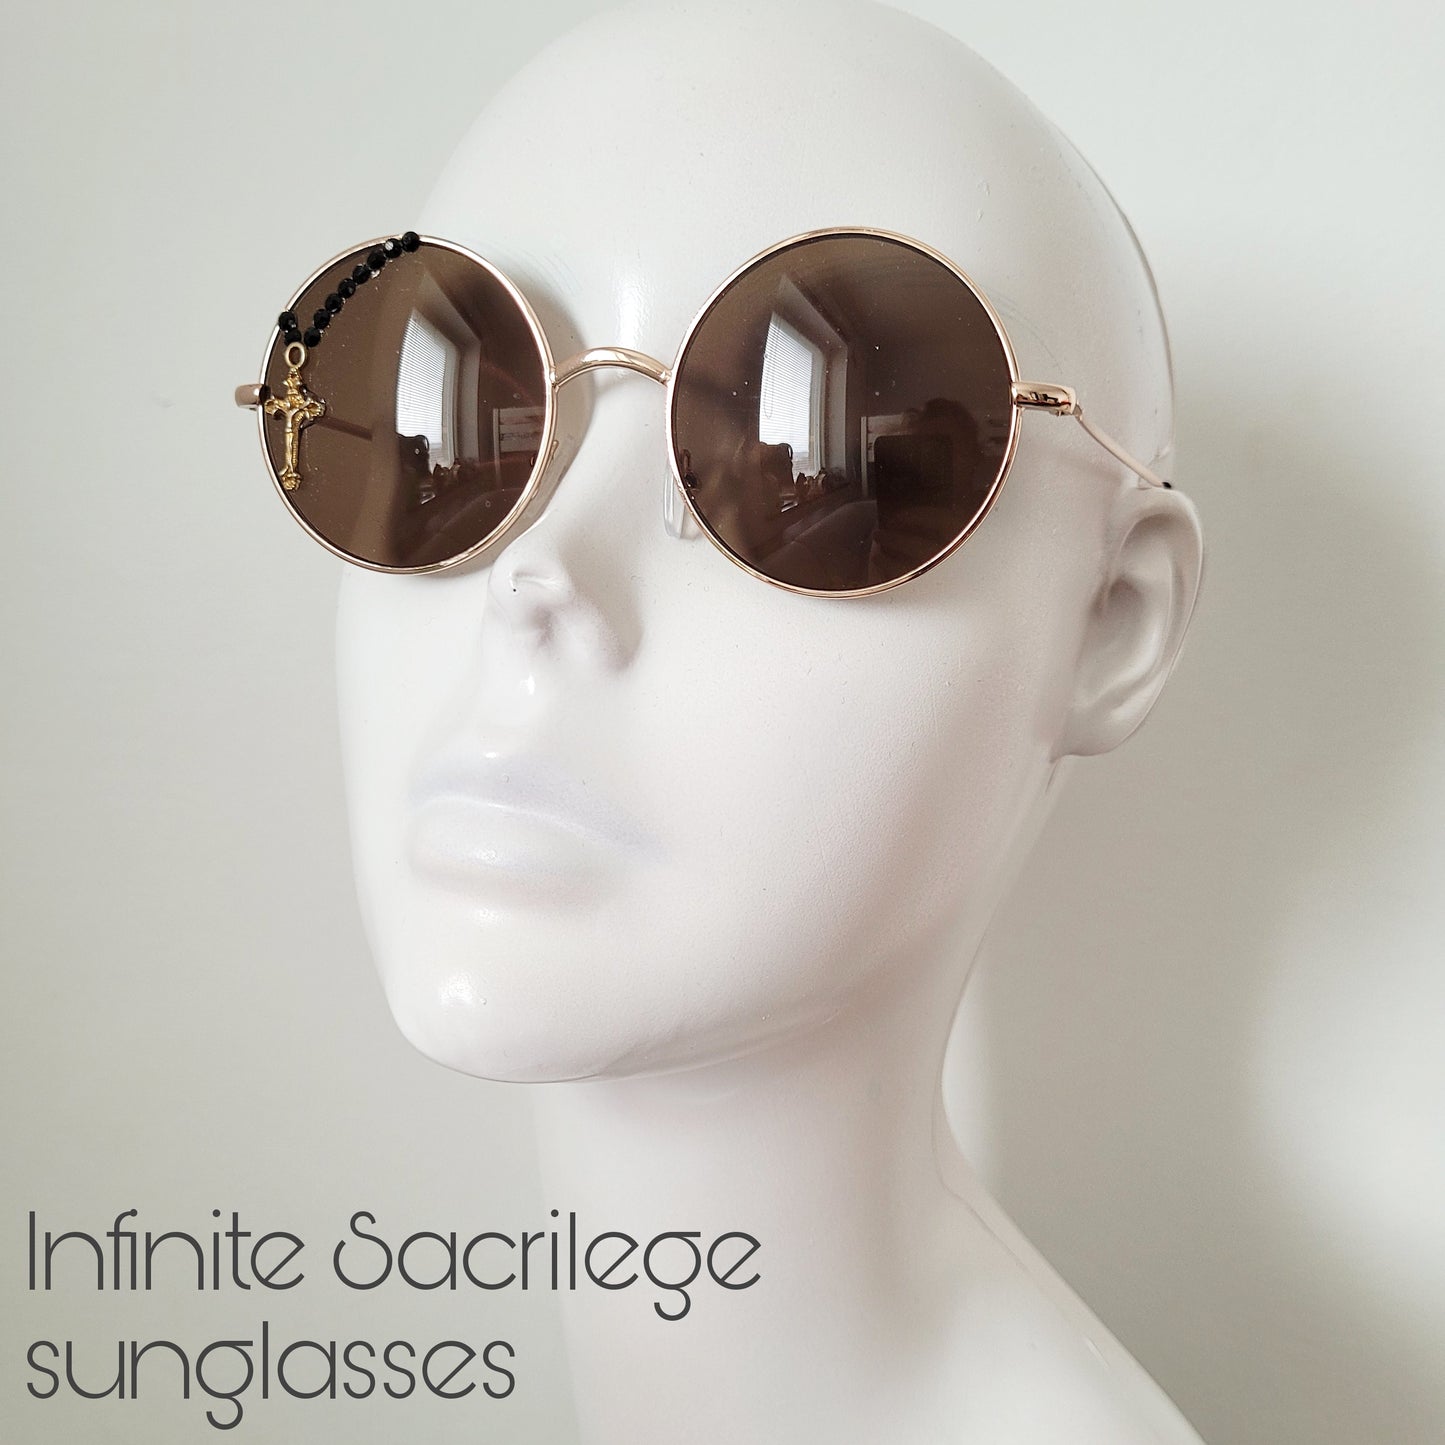 Sacrilegious Collection: The Infinite Sacrilege sunglasses, limited edition round unisex model